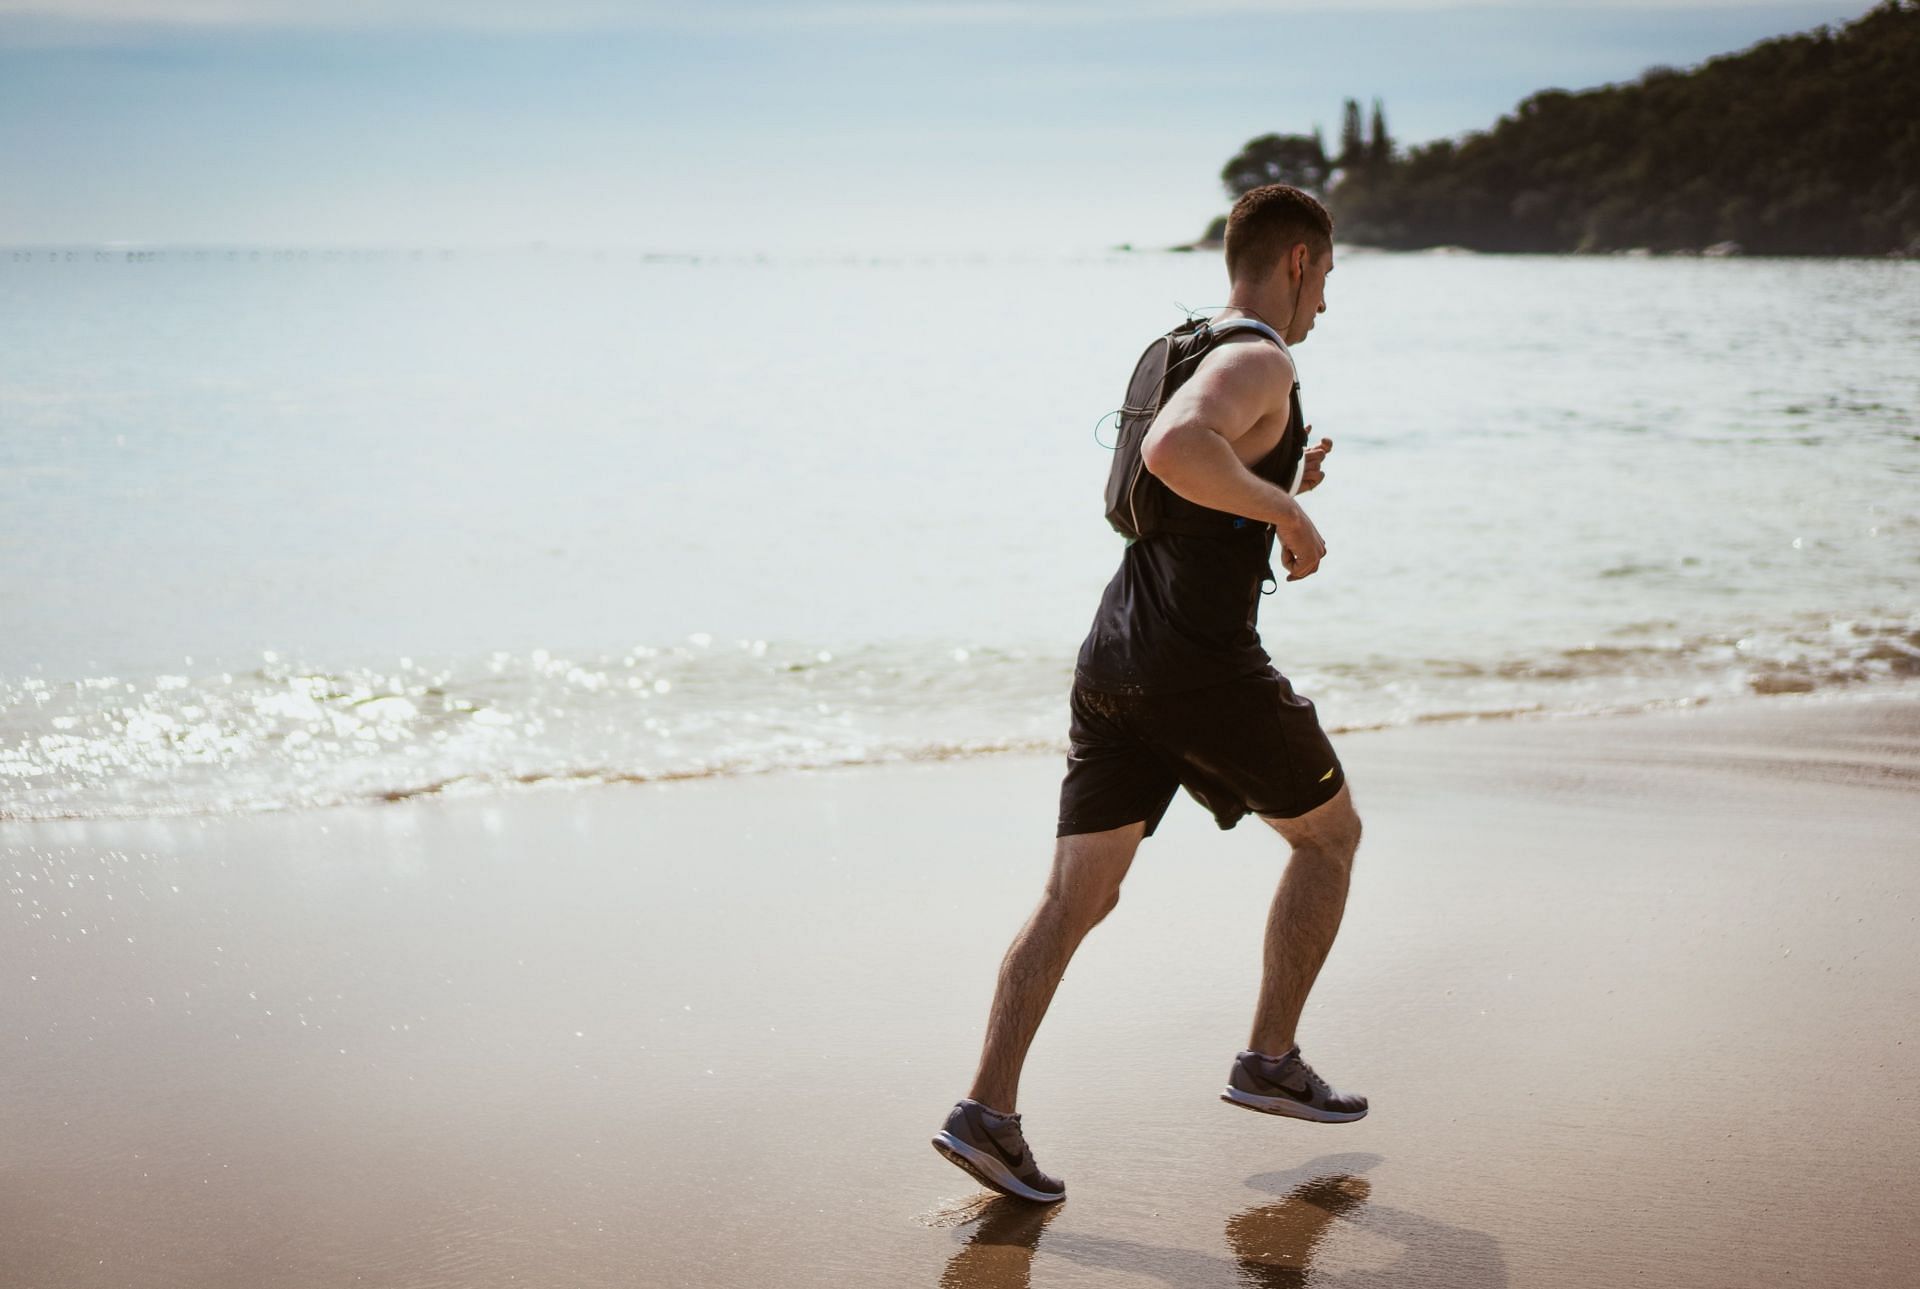 Walking can help you to lead a healthy lifestyle (Image via Pexels/Leandro Boogalu)